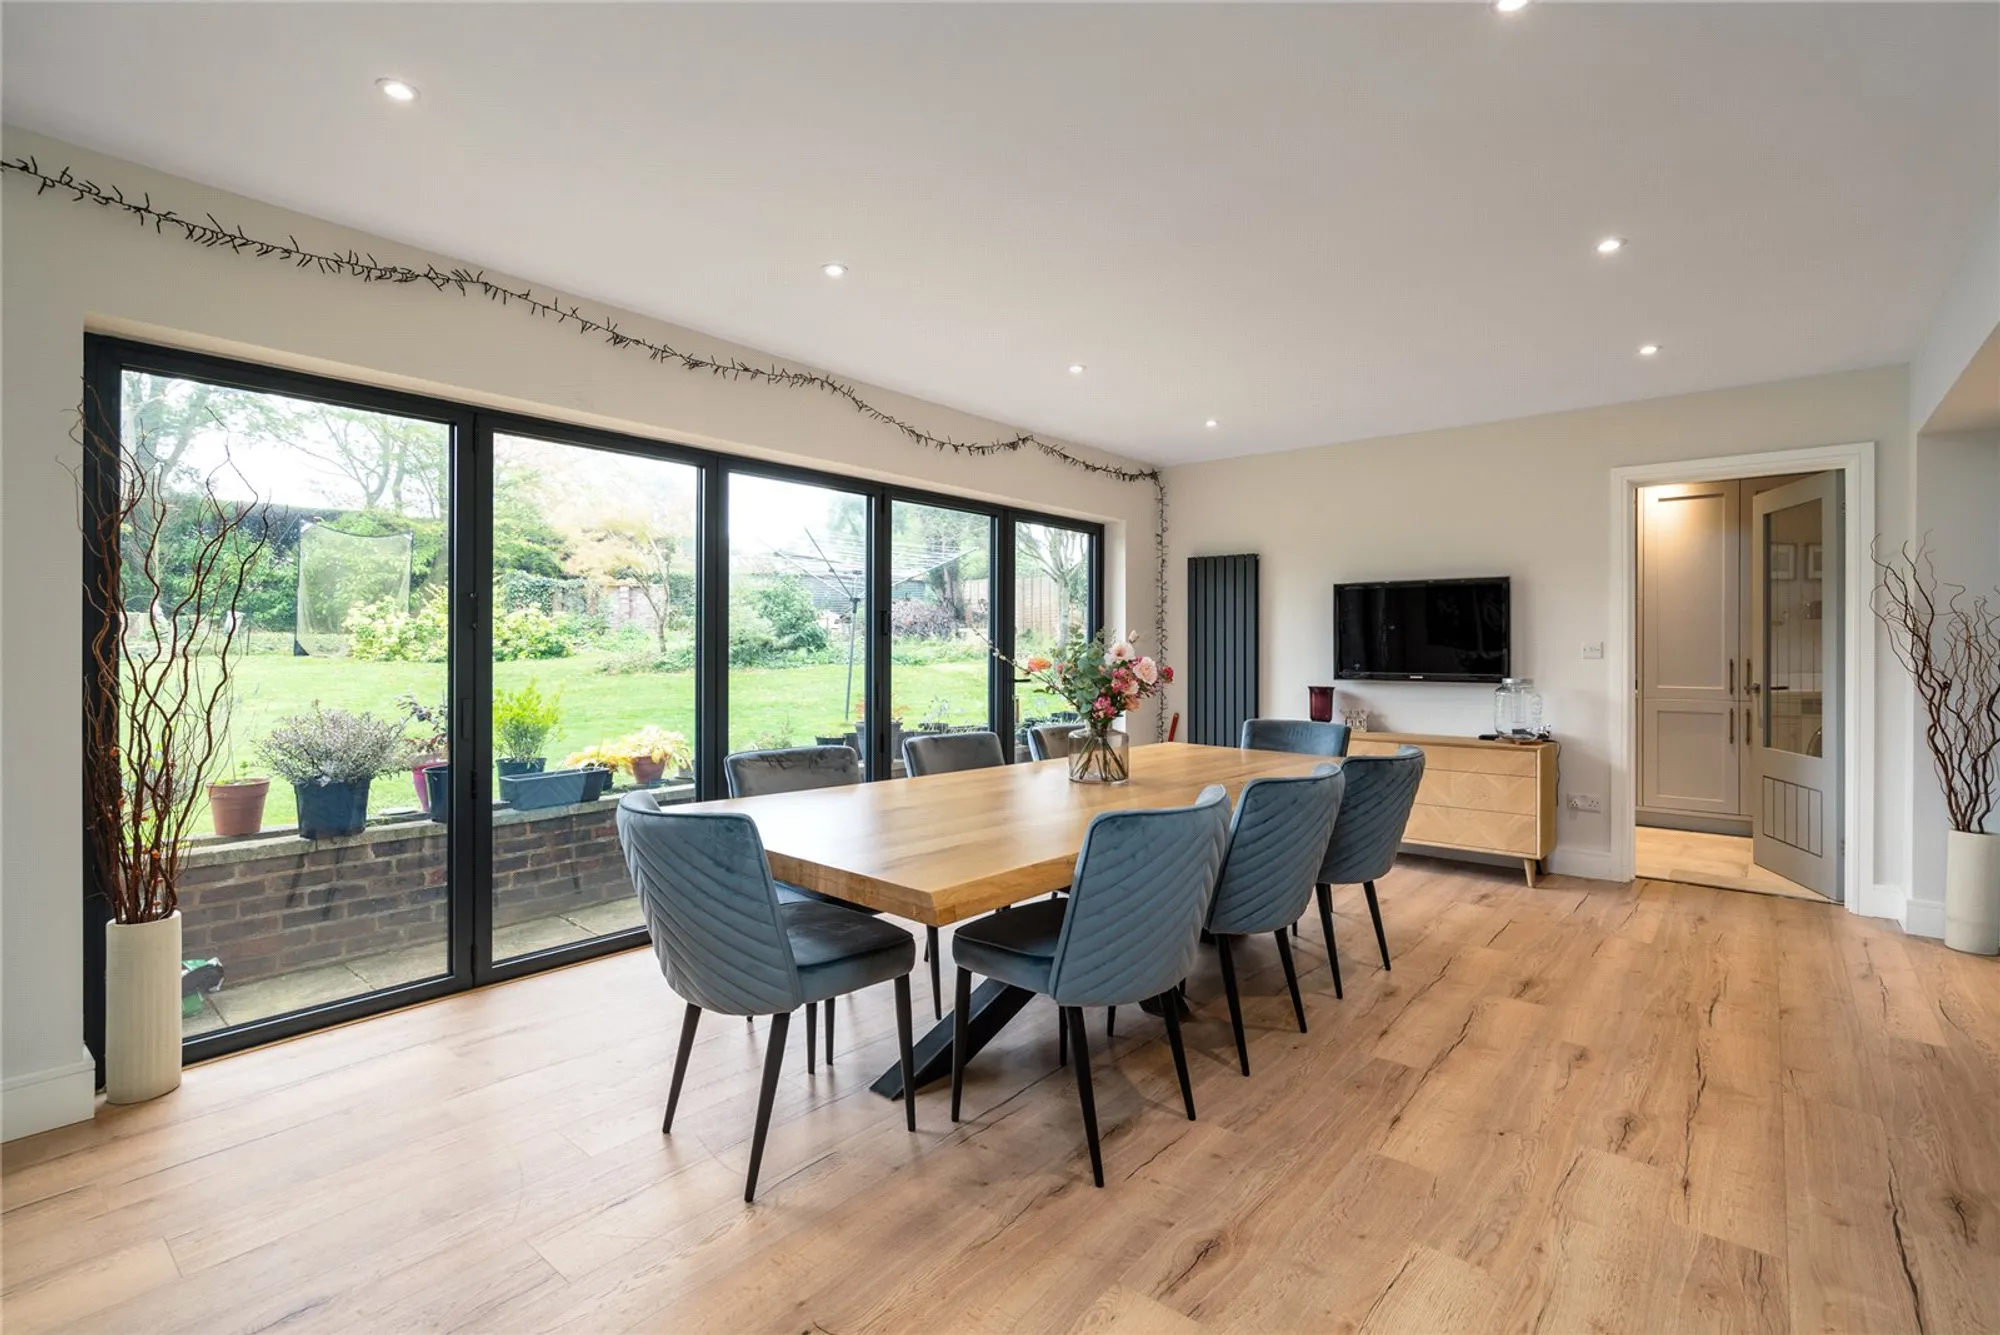 4 bed detached house for sale in Lunghurst Road, Caterham - Property Image 1